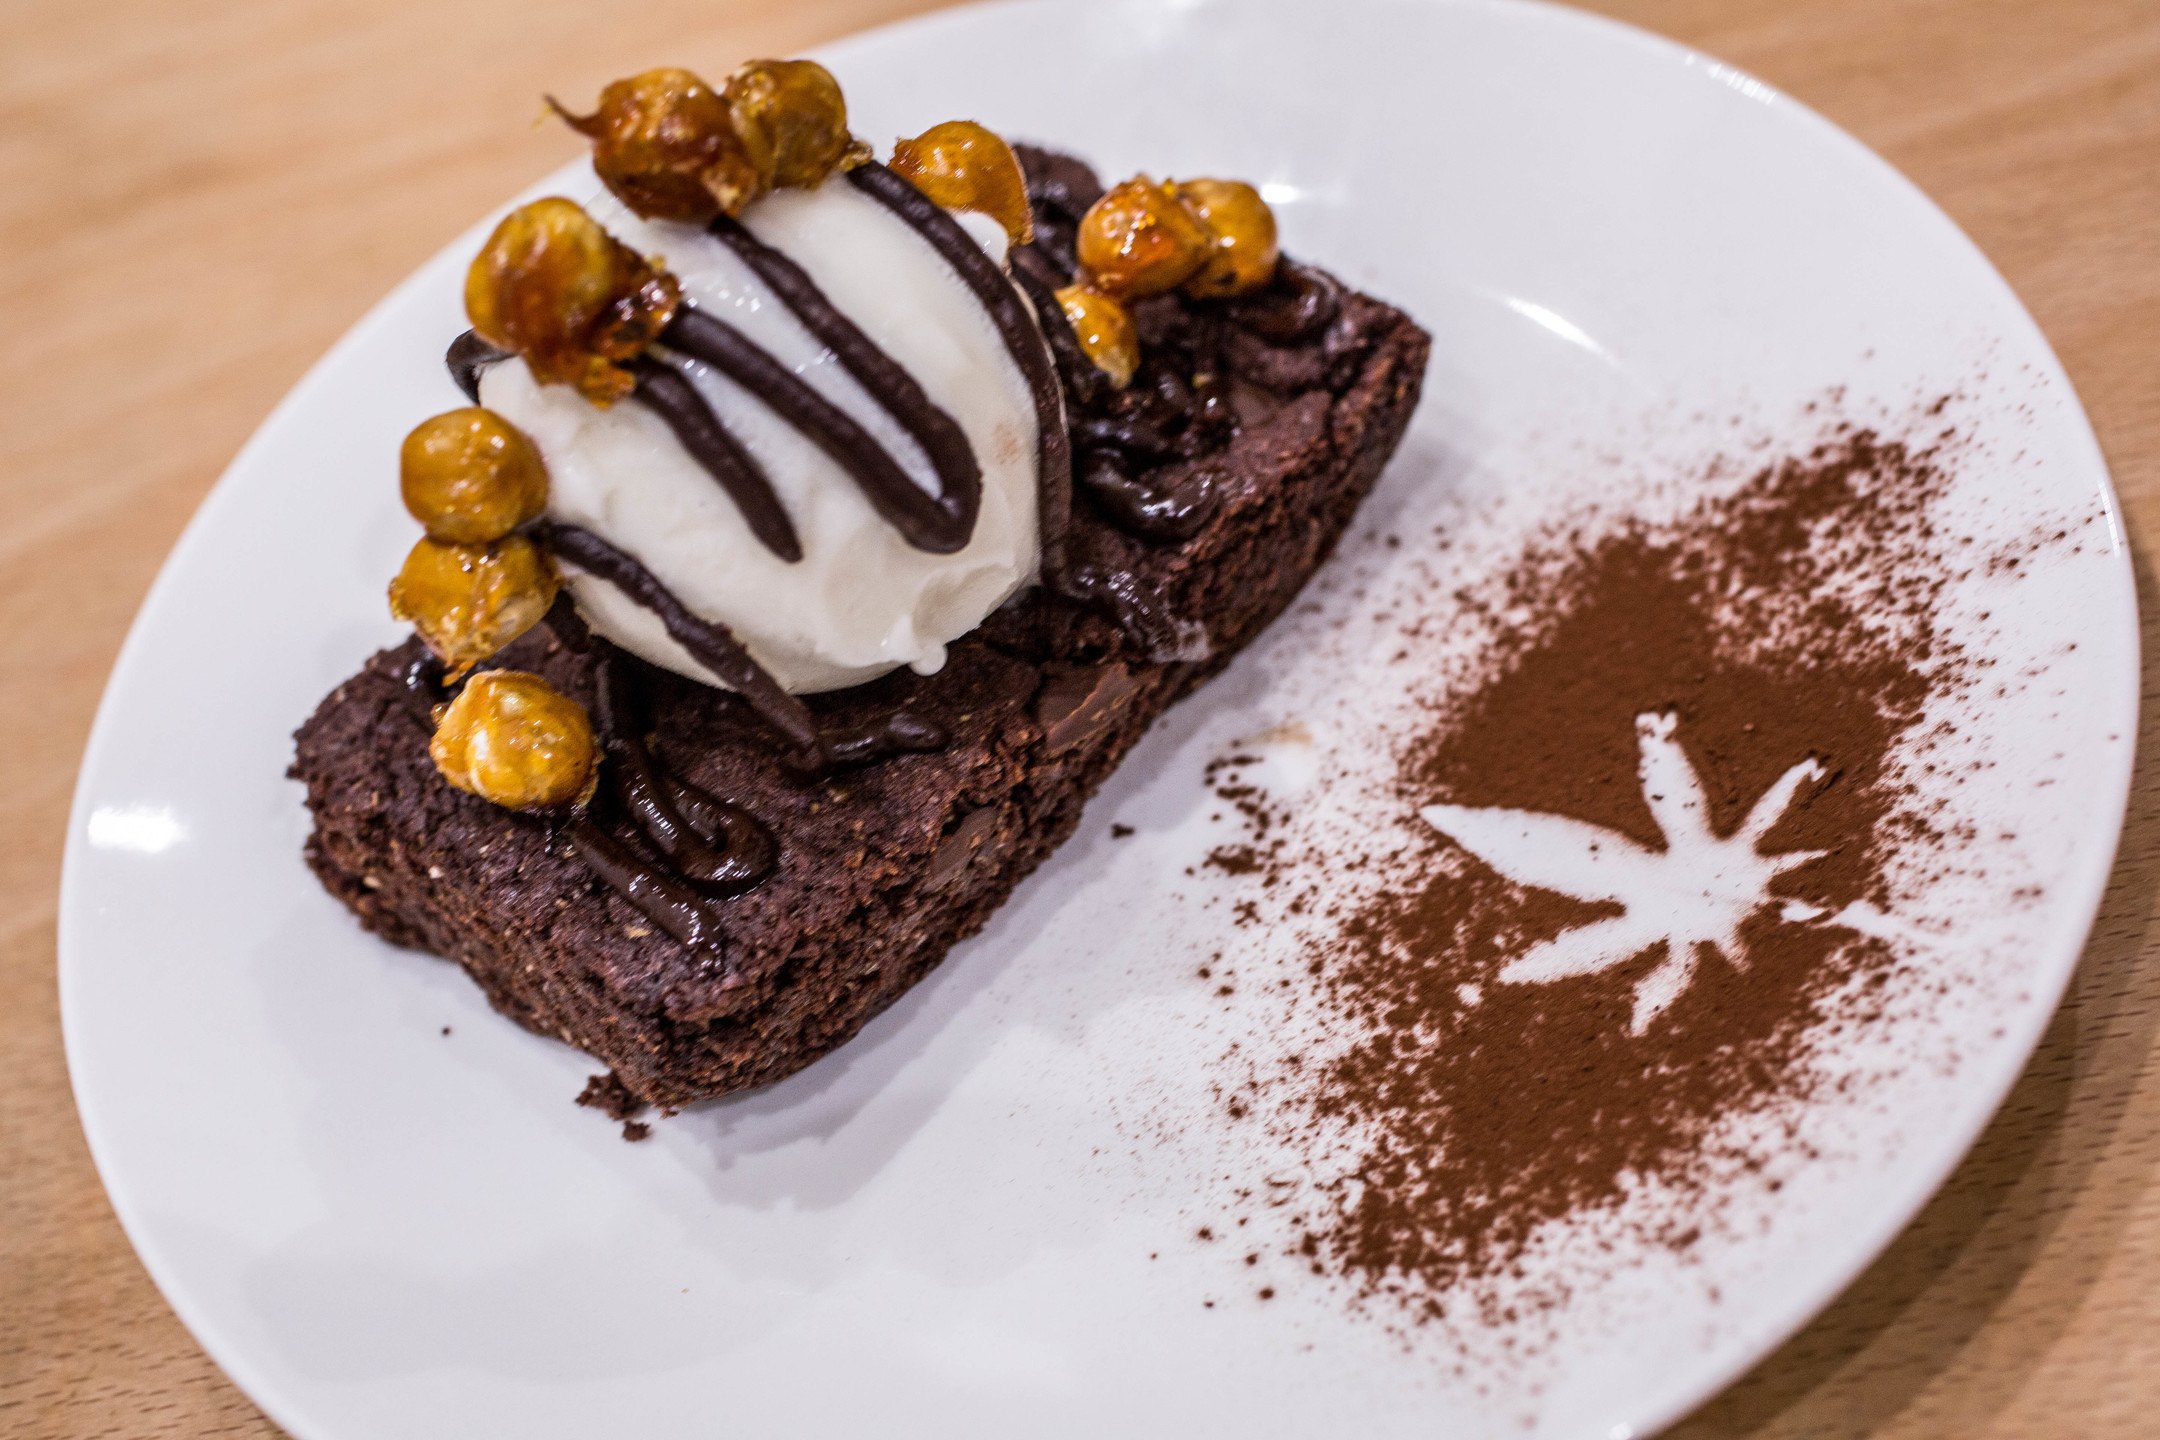 A decadent CBD-infused chocolate brownie a la mode, on a white plate decorated with a hemp leaf drawn in cocoa powder. The Canna Kitchen is the UK's first CBD restaurant, and it's making waves for their delicious vegetarian food.